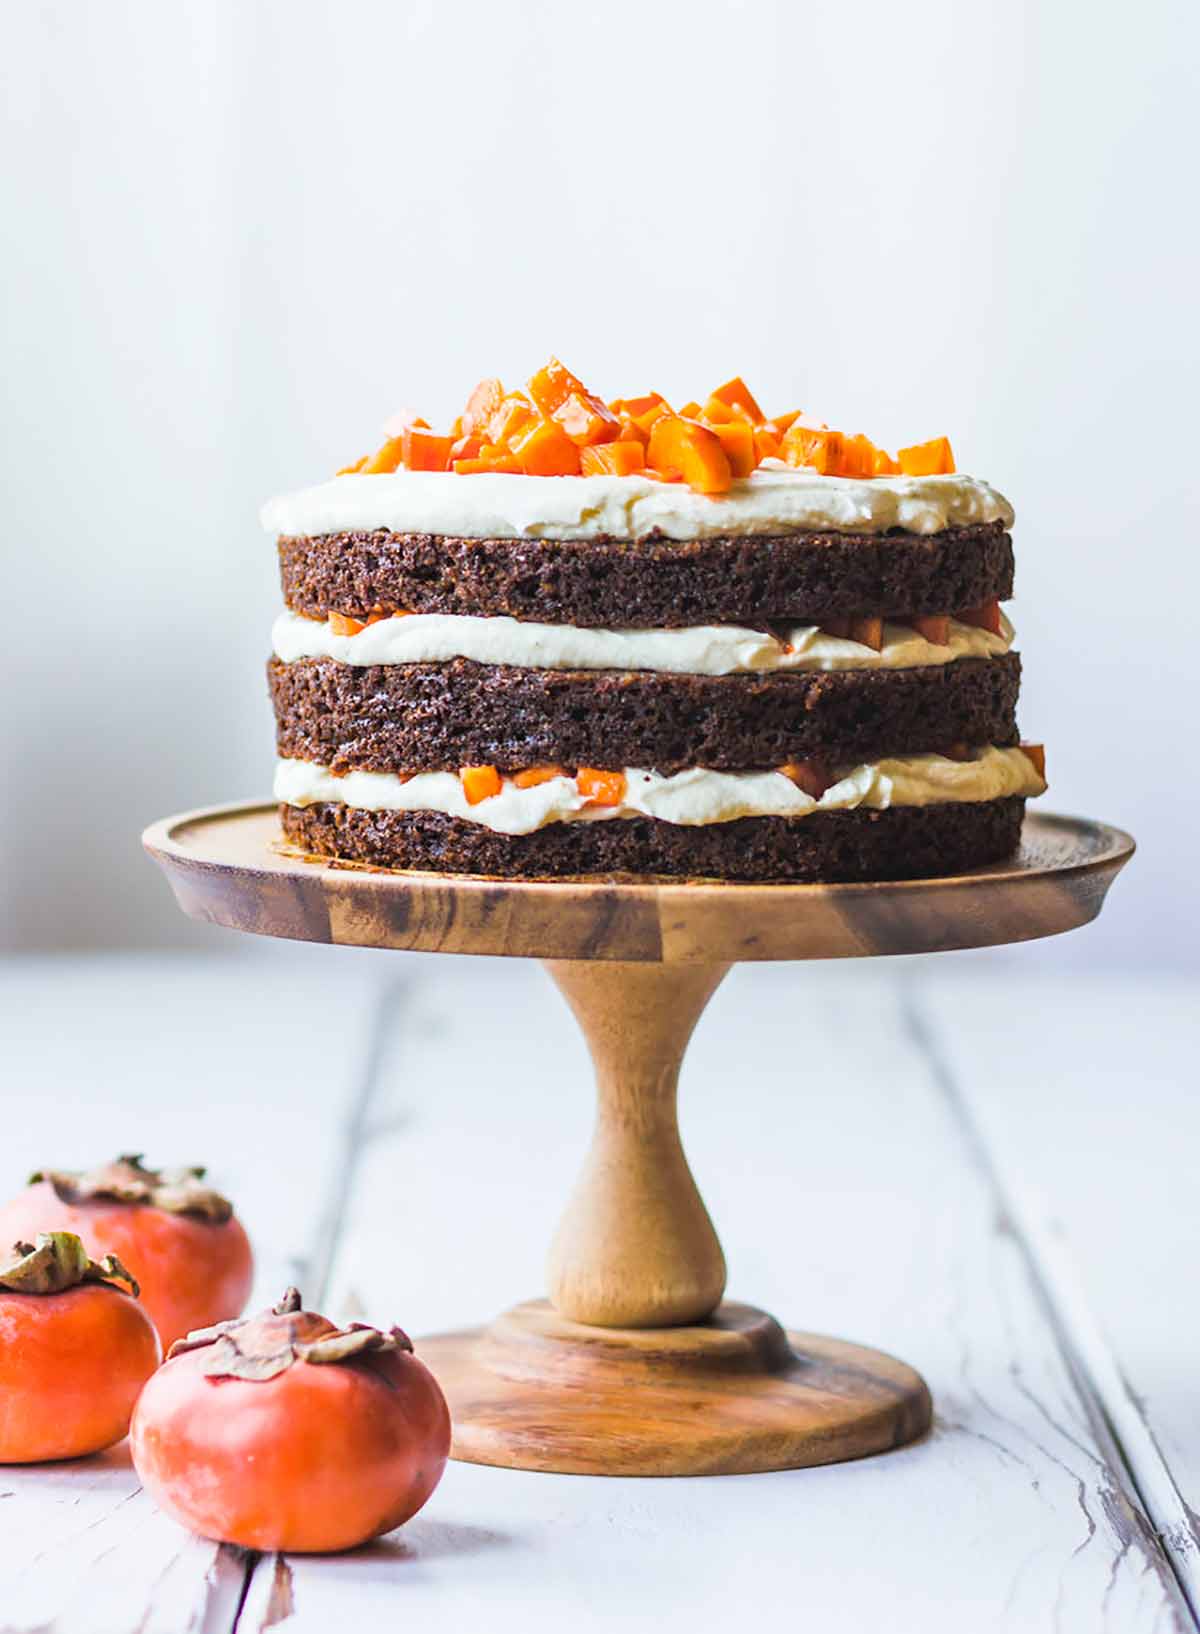 A triple-layer cake with white filling and chopped persimmons on top an example of high altitude baking